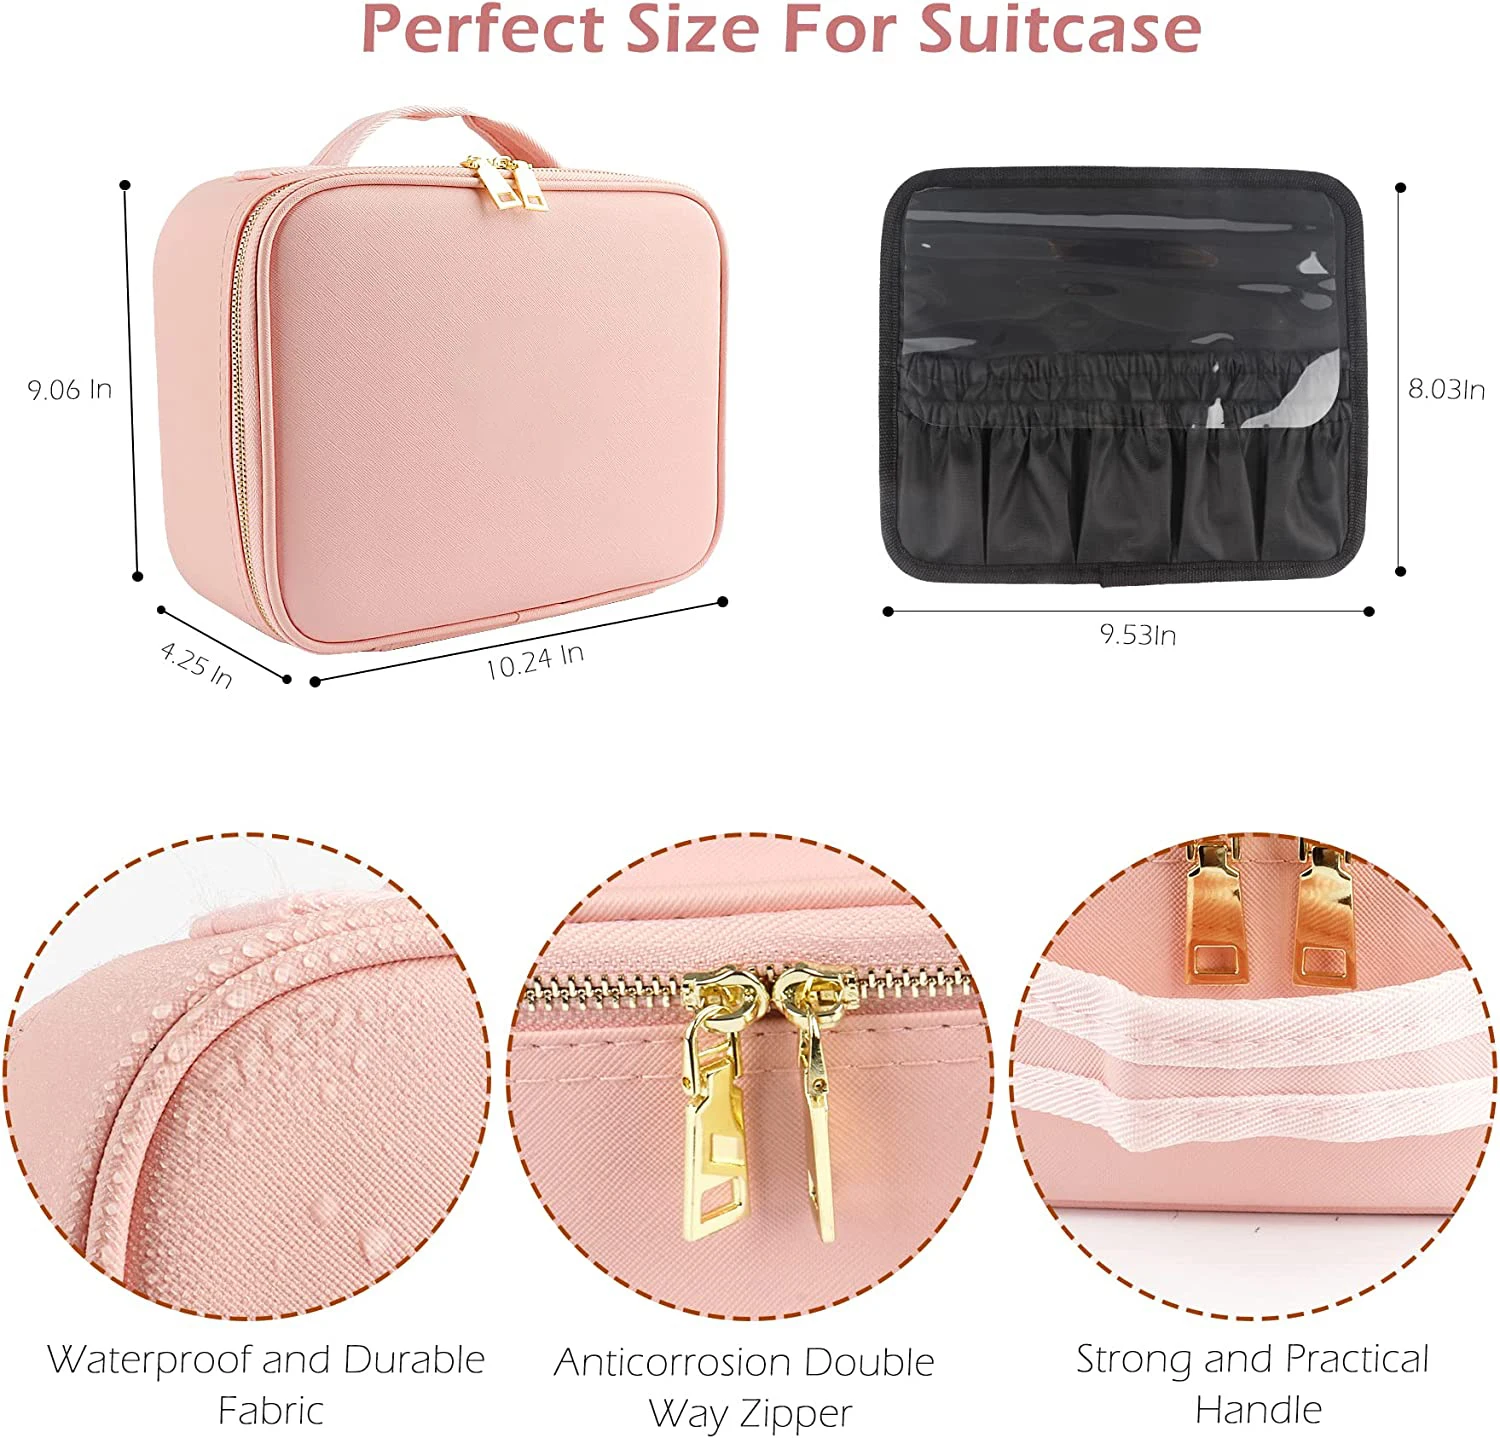 Huge Capacity Travel Makeup Bag with Lighted Mirror, Upgrade Large Makeup  Case Cosmetic Train Case Professional Waterproof Cosmetic Artist Organizer